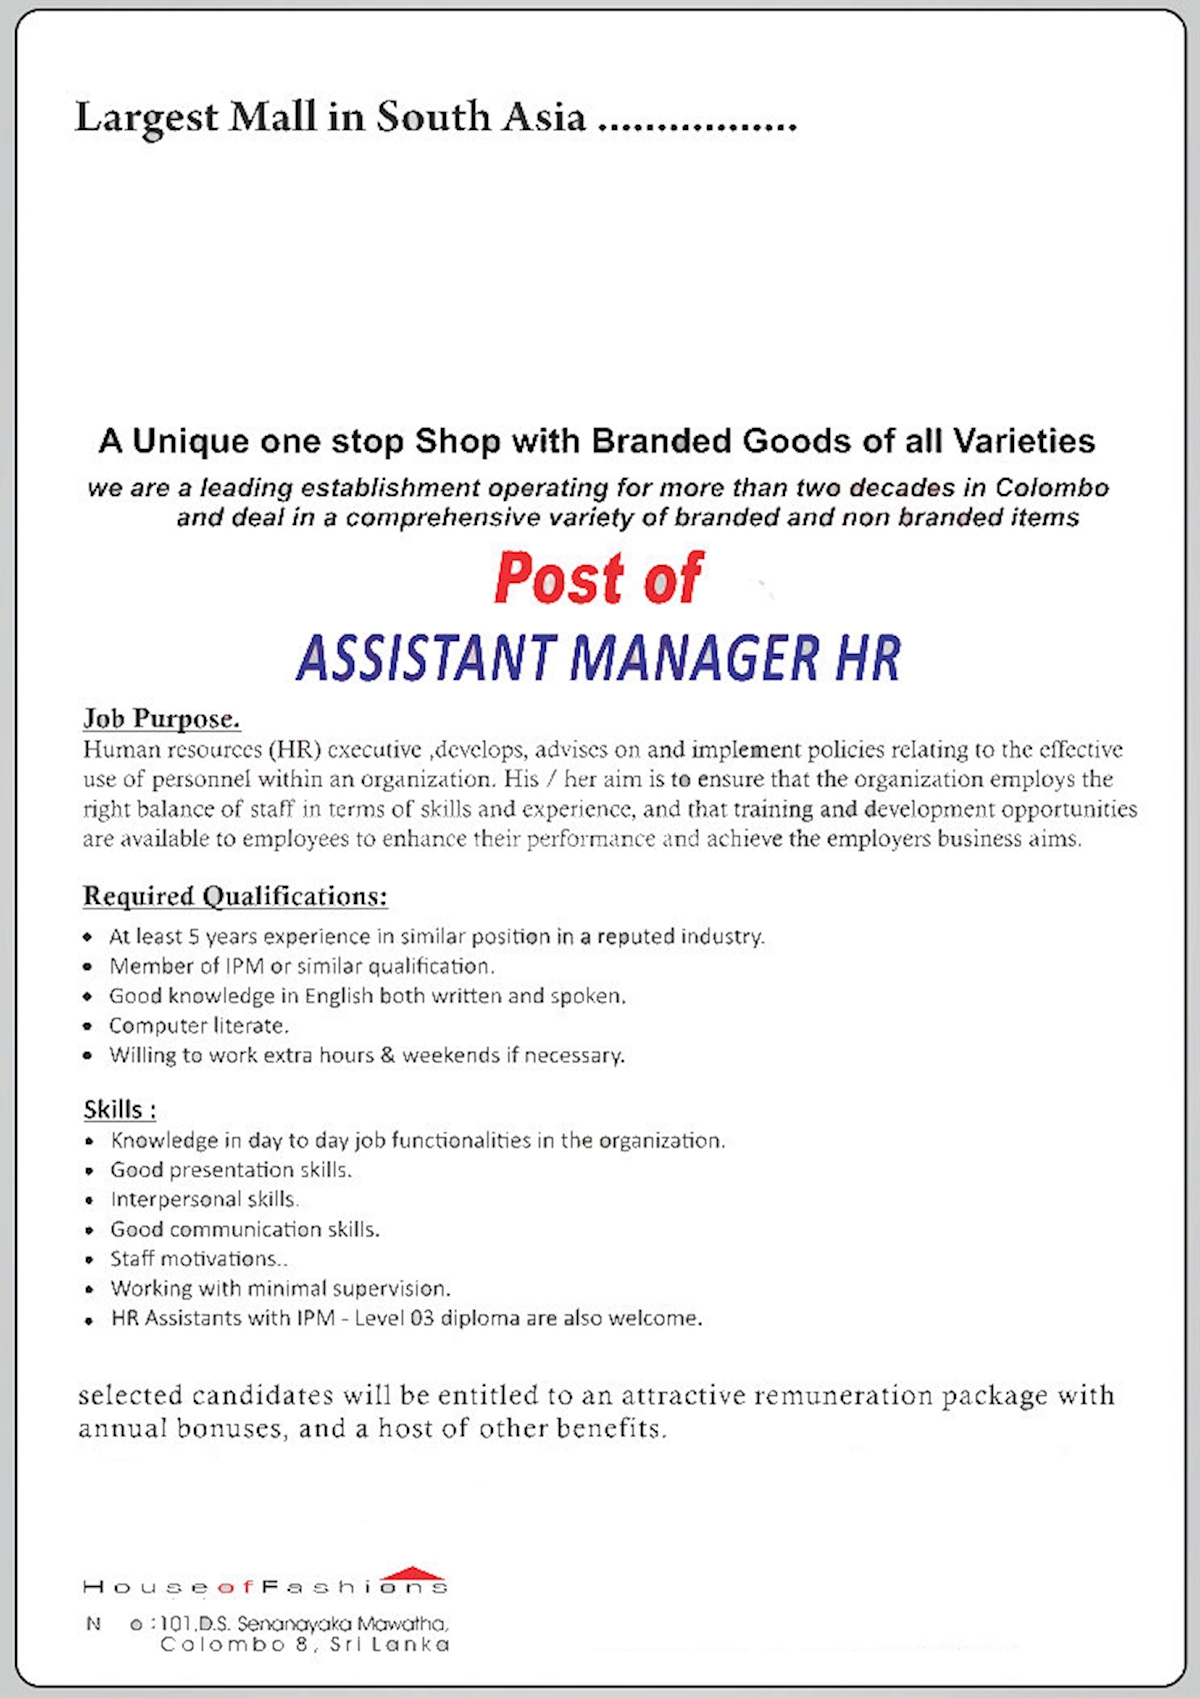 Assistant Manager HR